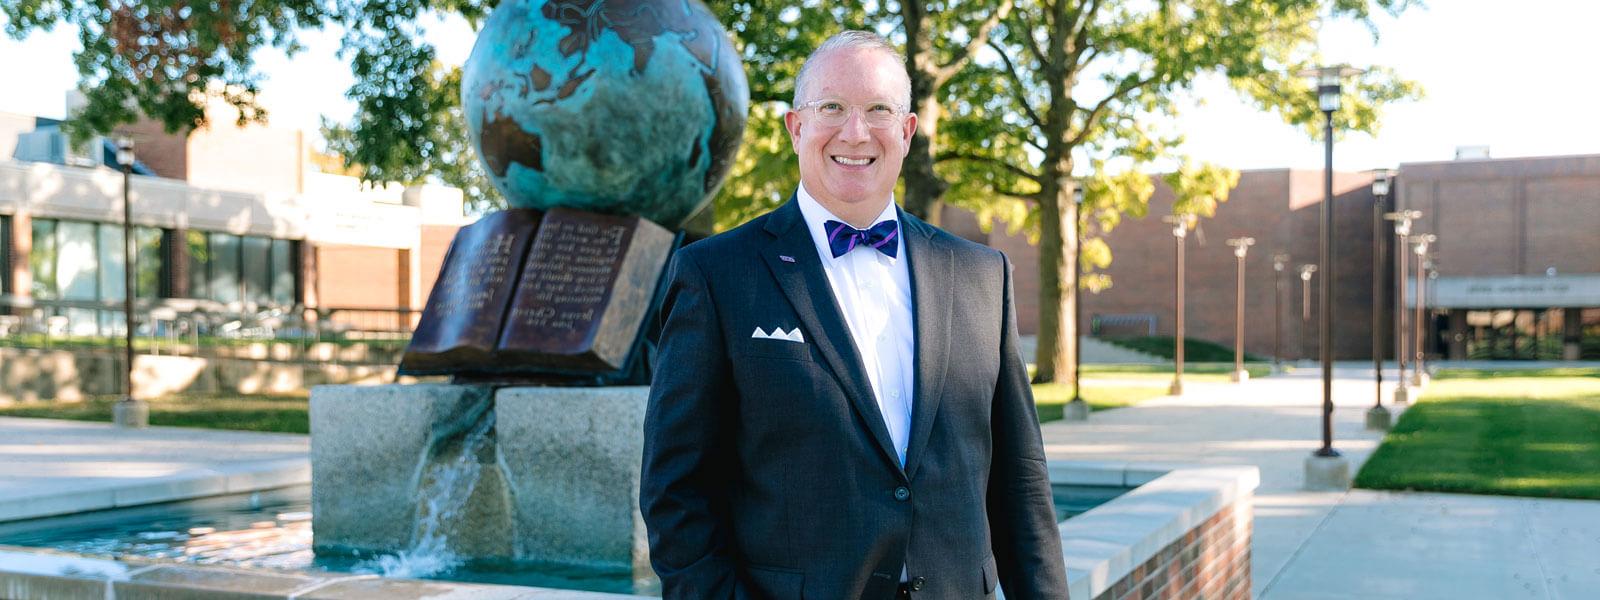 President Melson smiling while standing in front of globe water sculpture